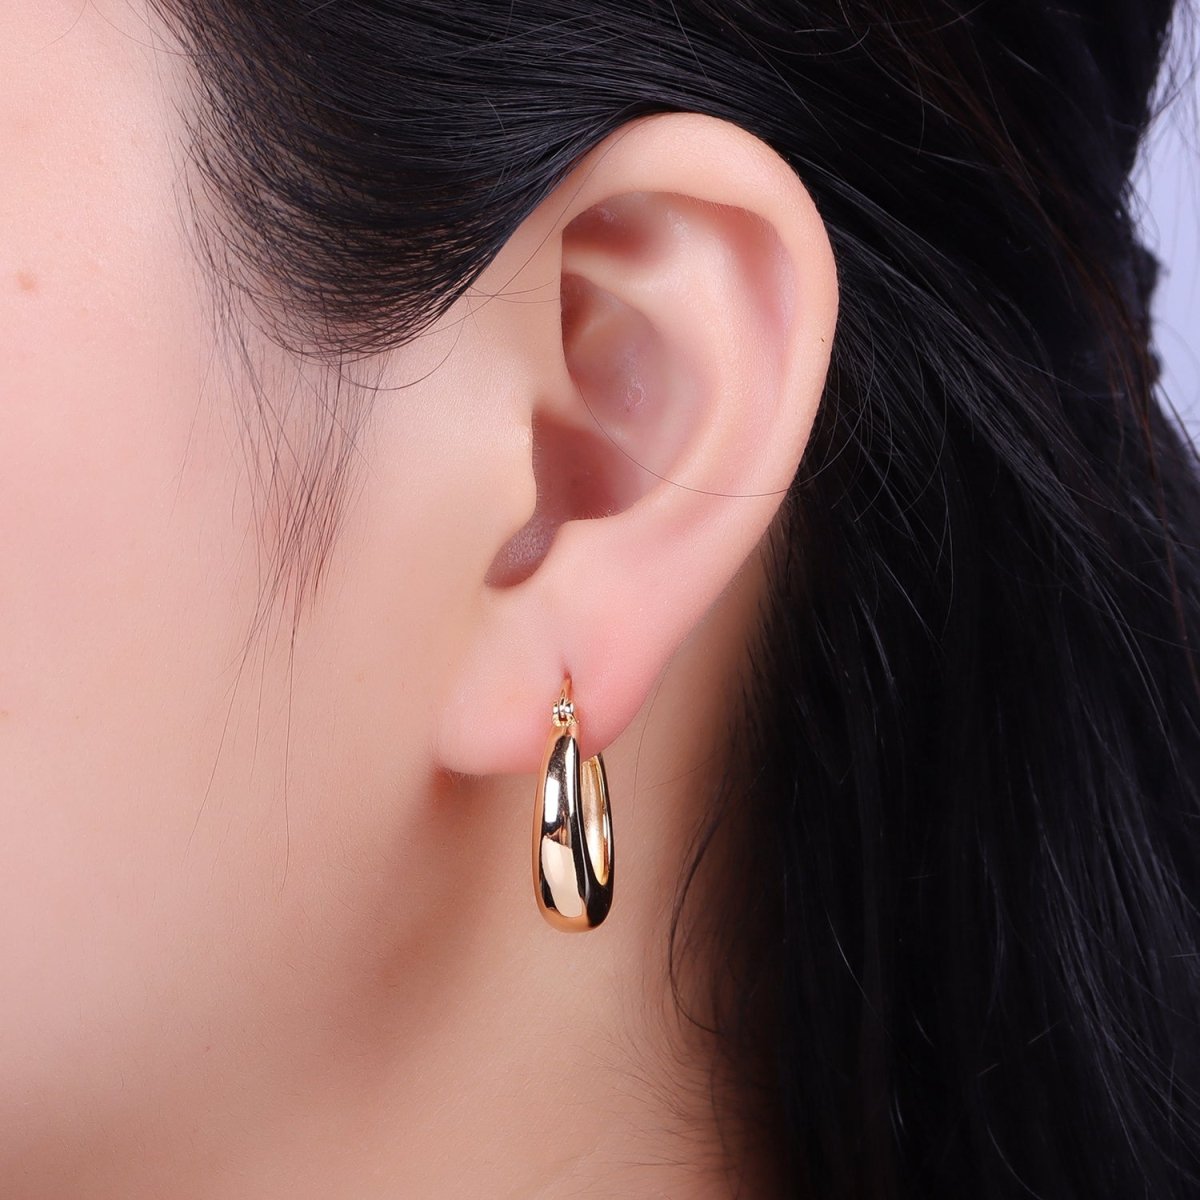 24mm Minimalist Thin Dome French Lock Latch Earrings in Gold & Silver | AB067 AB068 - DLUXCA